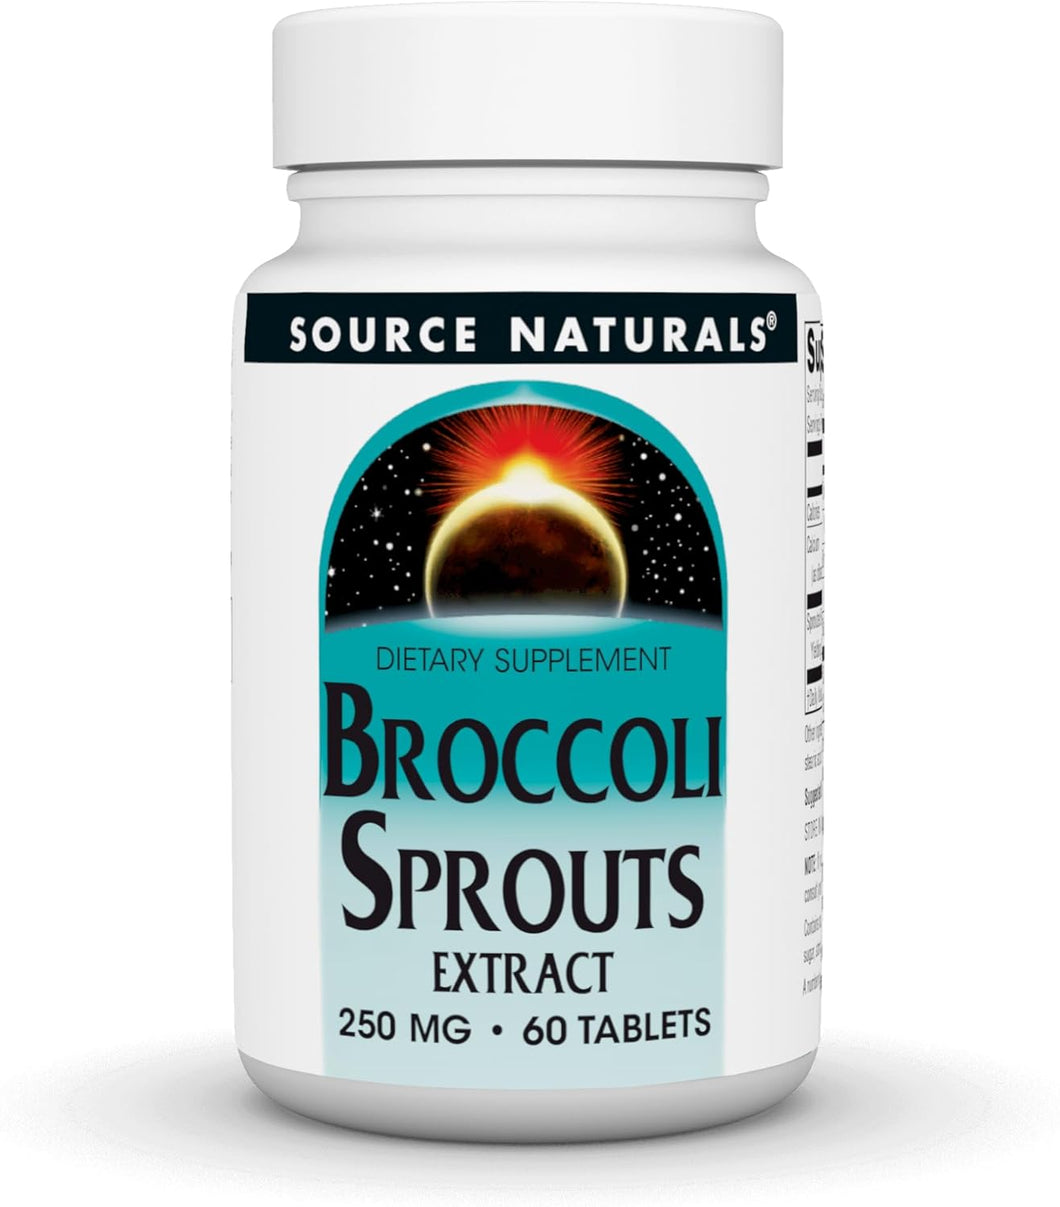 Source Naturals Broccoli Sprouts Extract, Provides 2,000 mcg of Sulforaphane per Serving, 250 mg - 60 Tablets